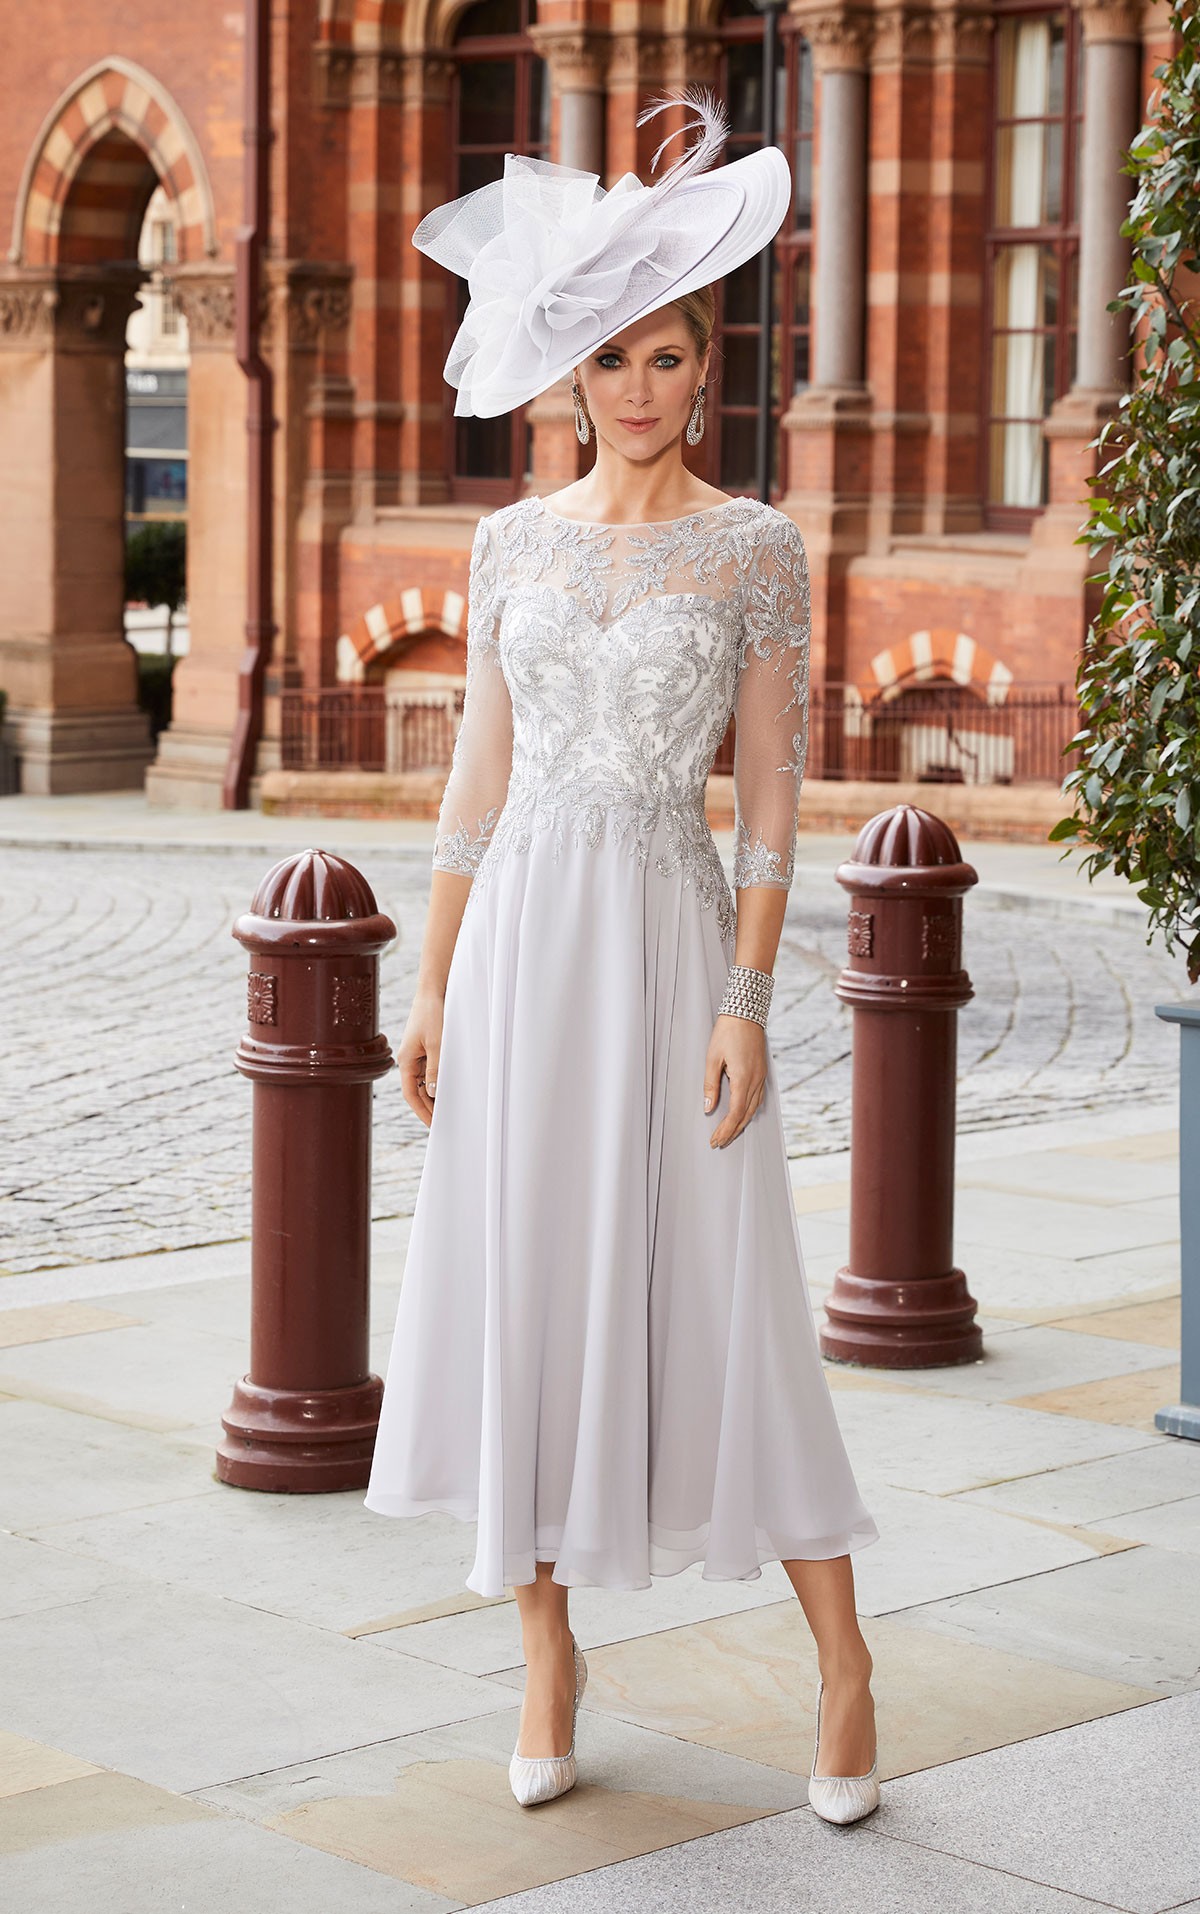 Veni Infantino 991819 - Veni Infantino 991819, Chiffon & beaded lace A-line dress  with sleeves - Mother of the Bride & Mature Bride collections at Occasions at Blessings Loyal Parade, Mill Rise, Westdene,  Brighton. BN1 5GG T: 01273 505766 E: info@blessingsbridal.co.uk